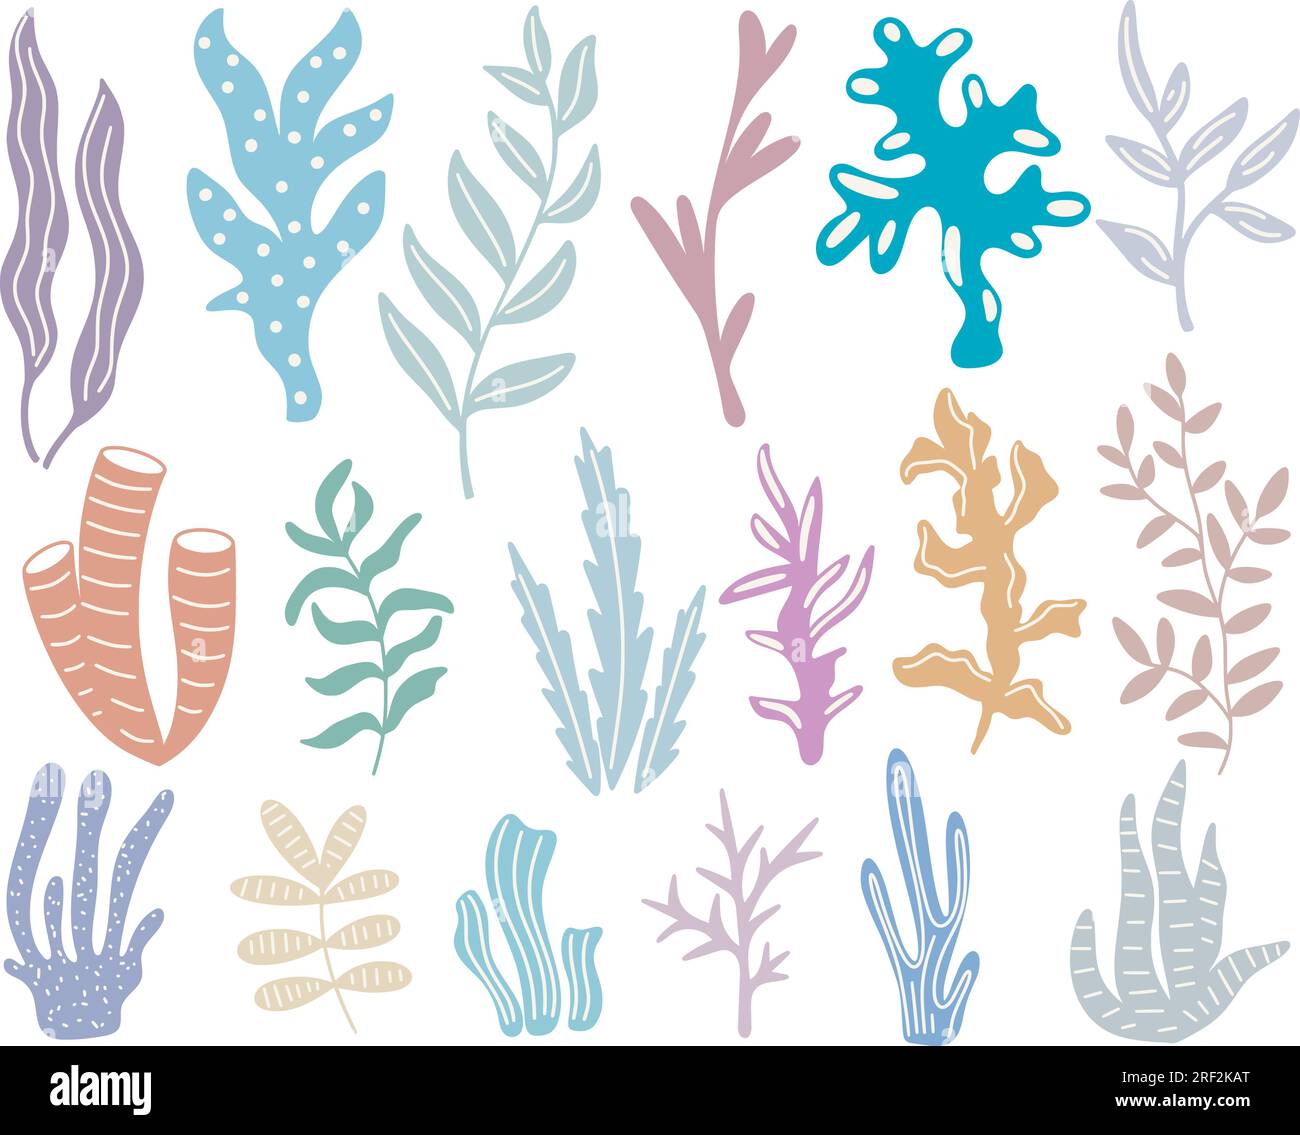 Seaweed decor Stock Vector Images - Page 3 - Alamy